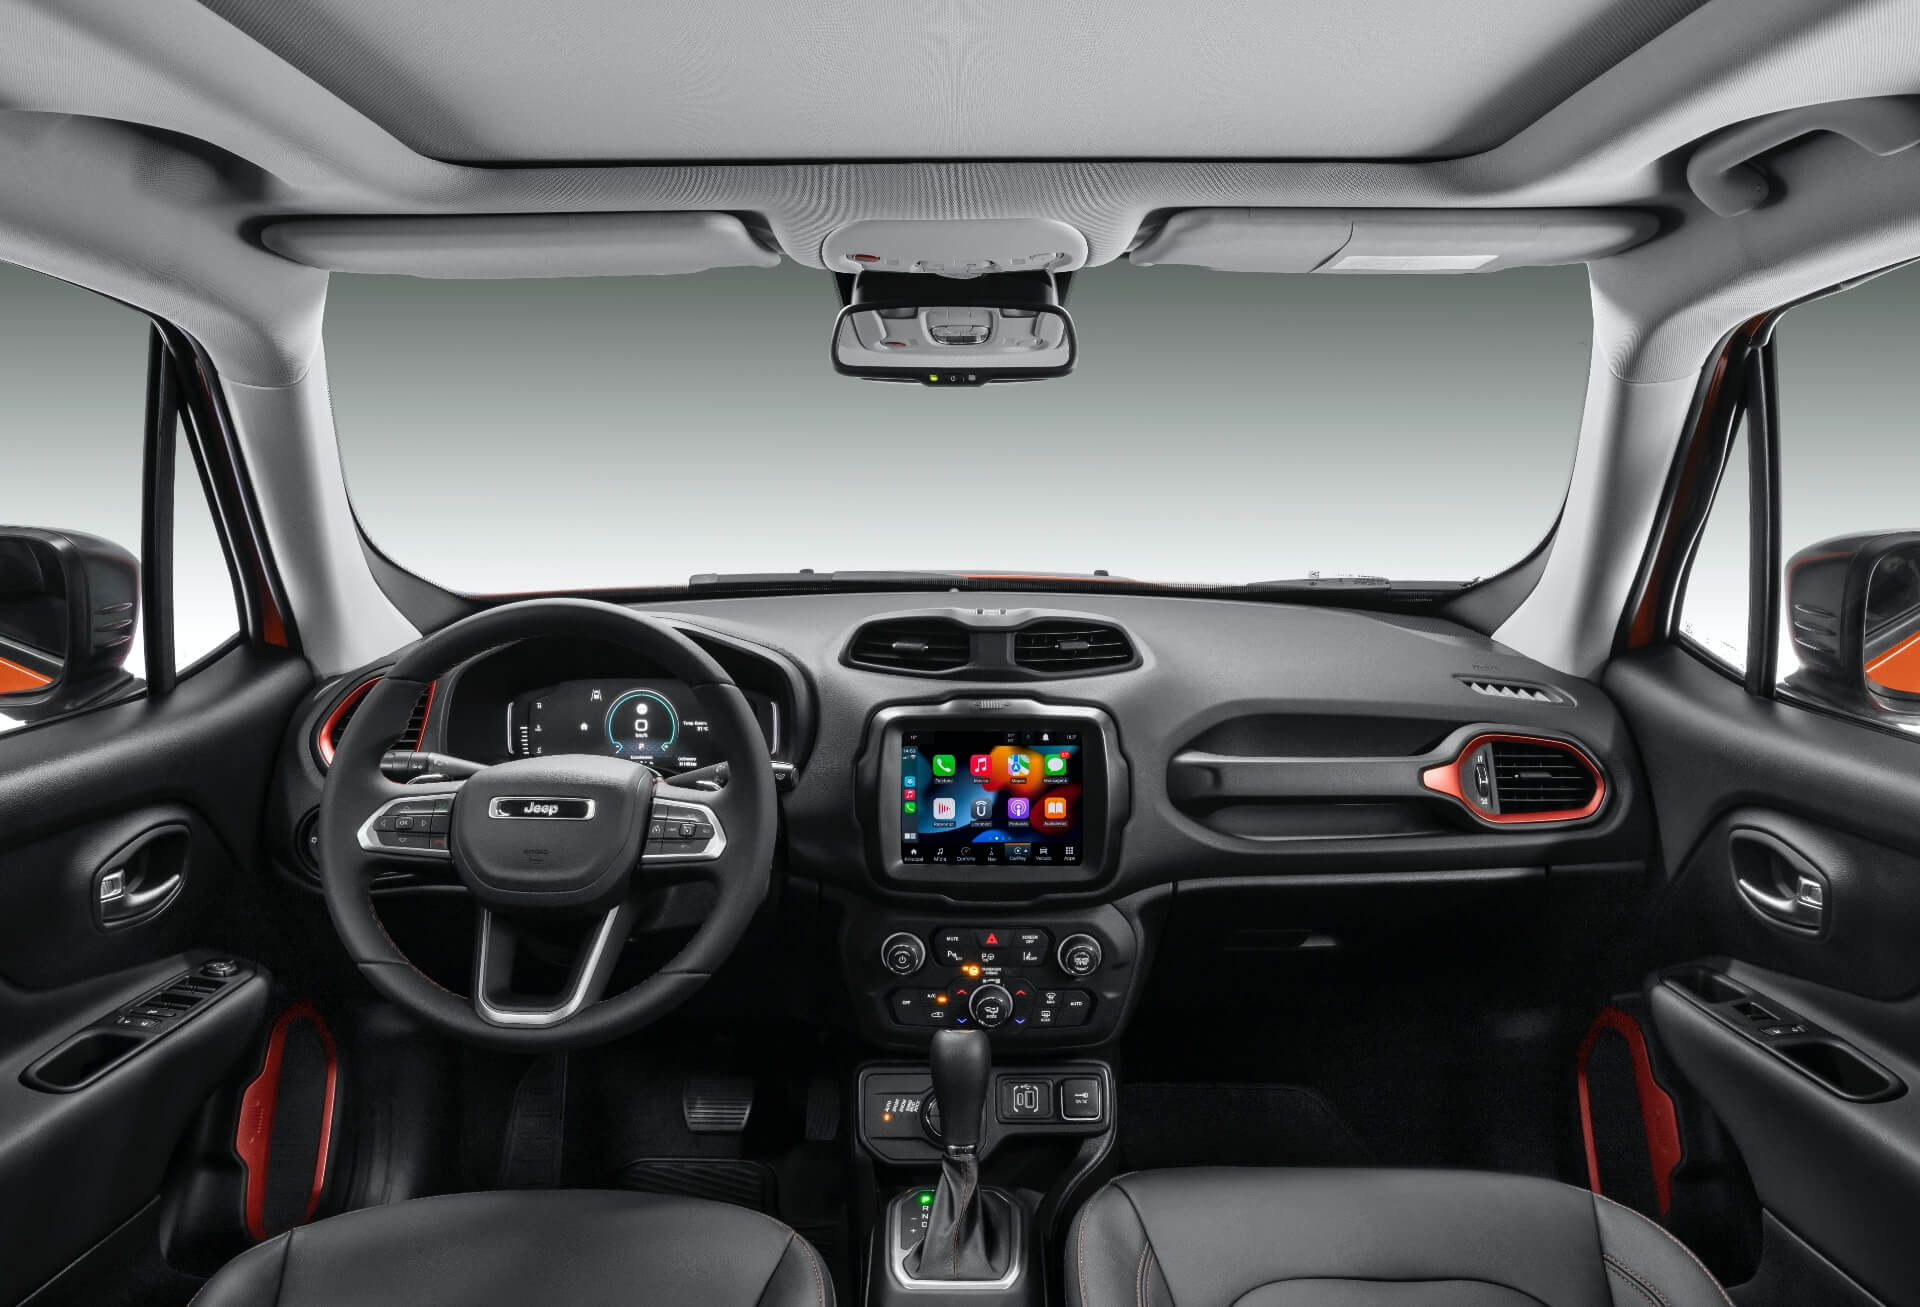 Details of the interior of the New Renegade